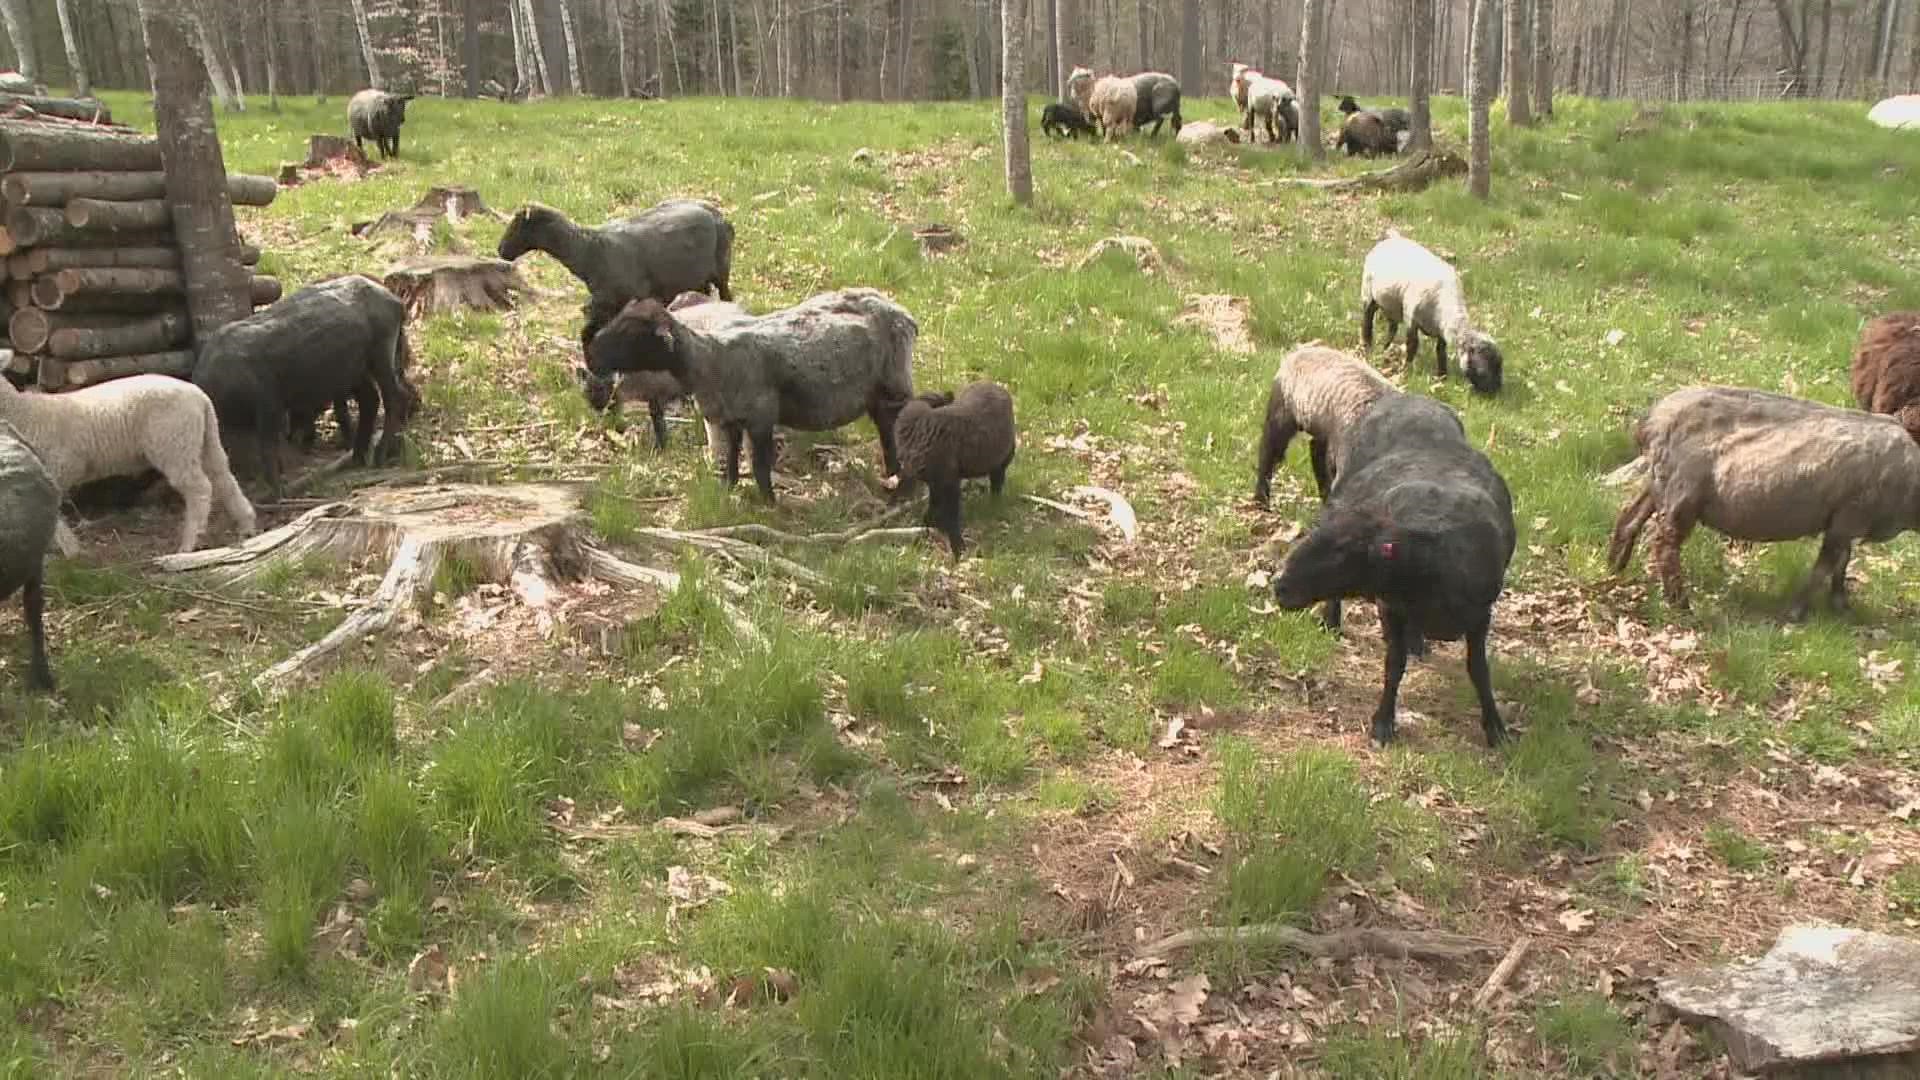 The ancient practice uses existing forest land to create pastures to raise livestock and crops.